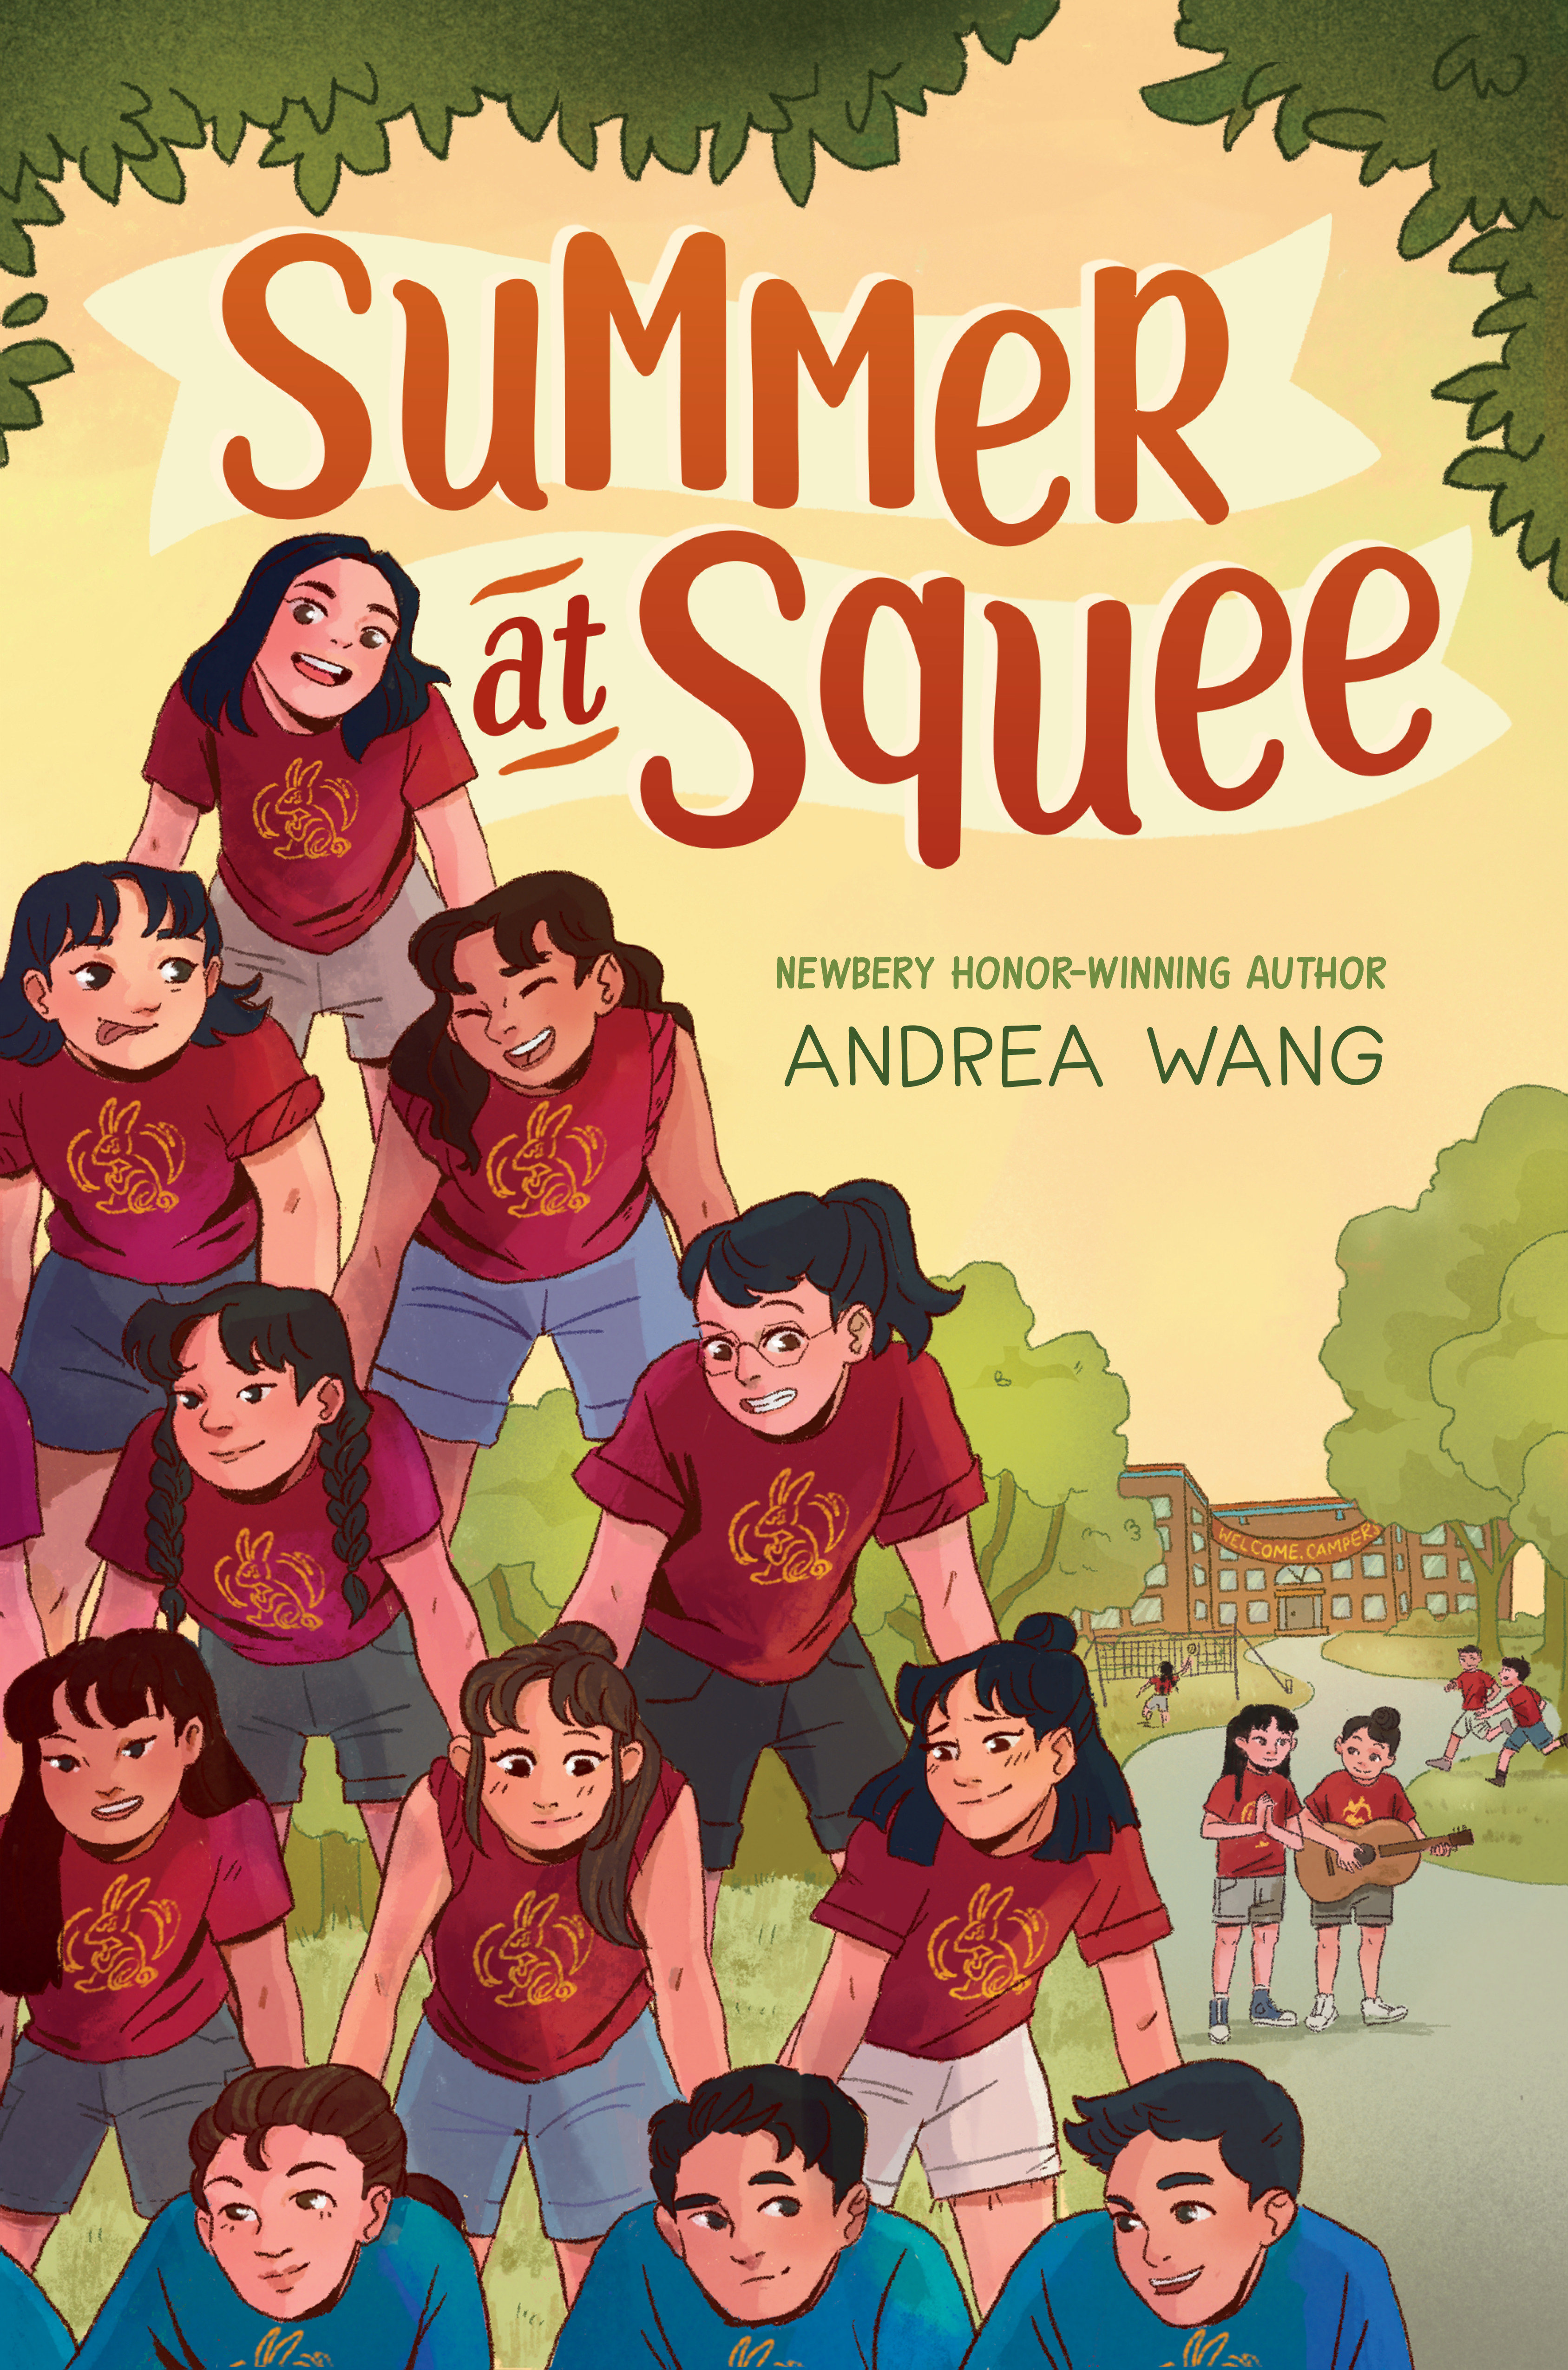 Summer At Squee (Hardcover Book)